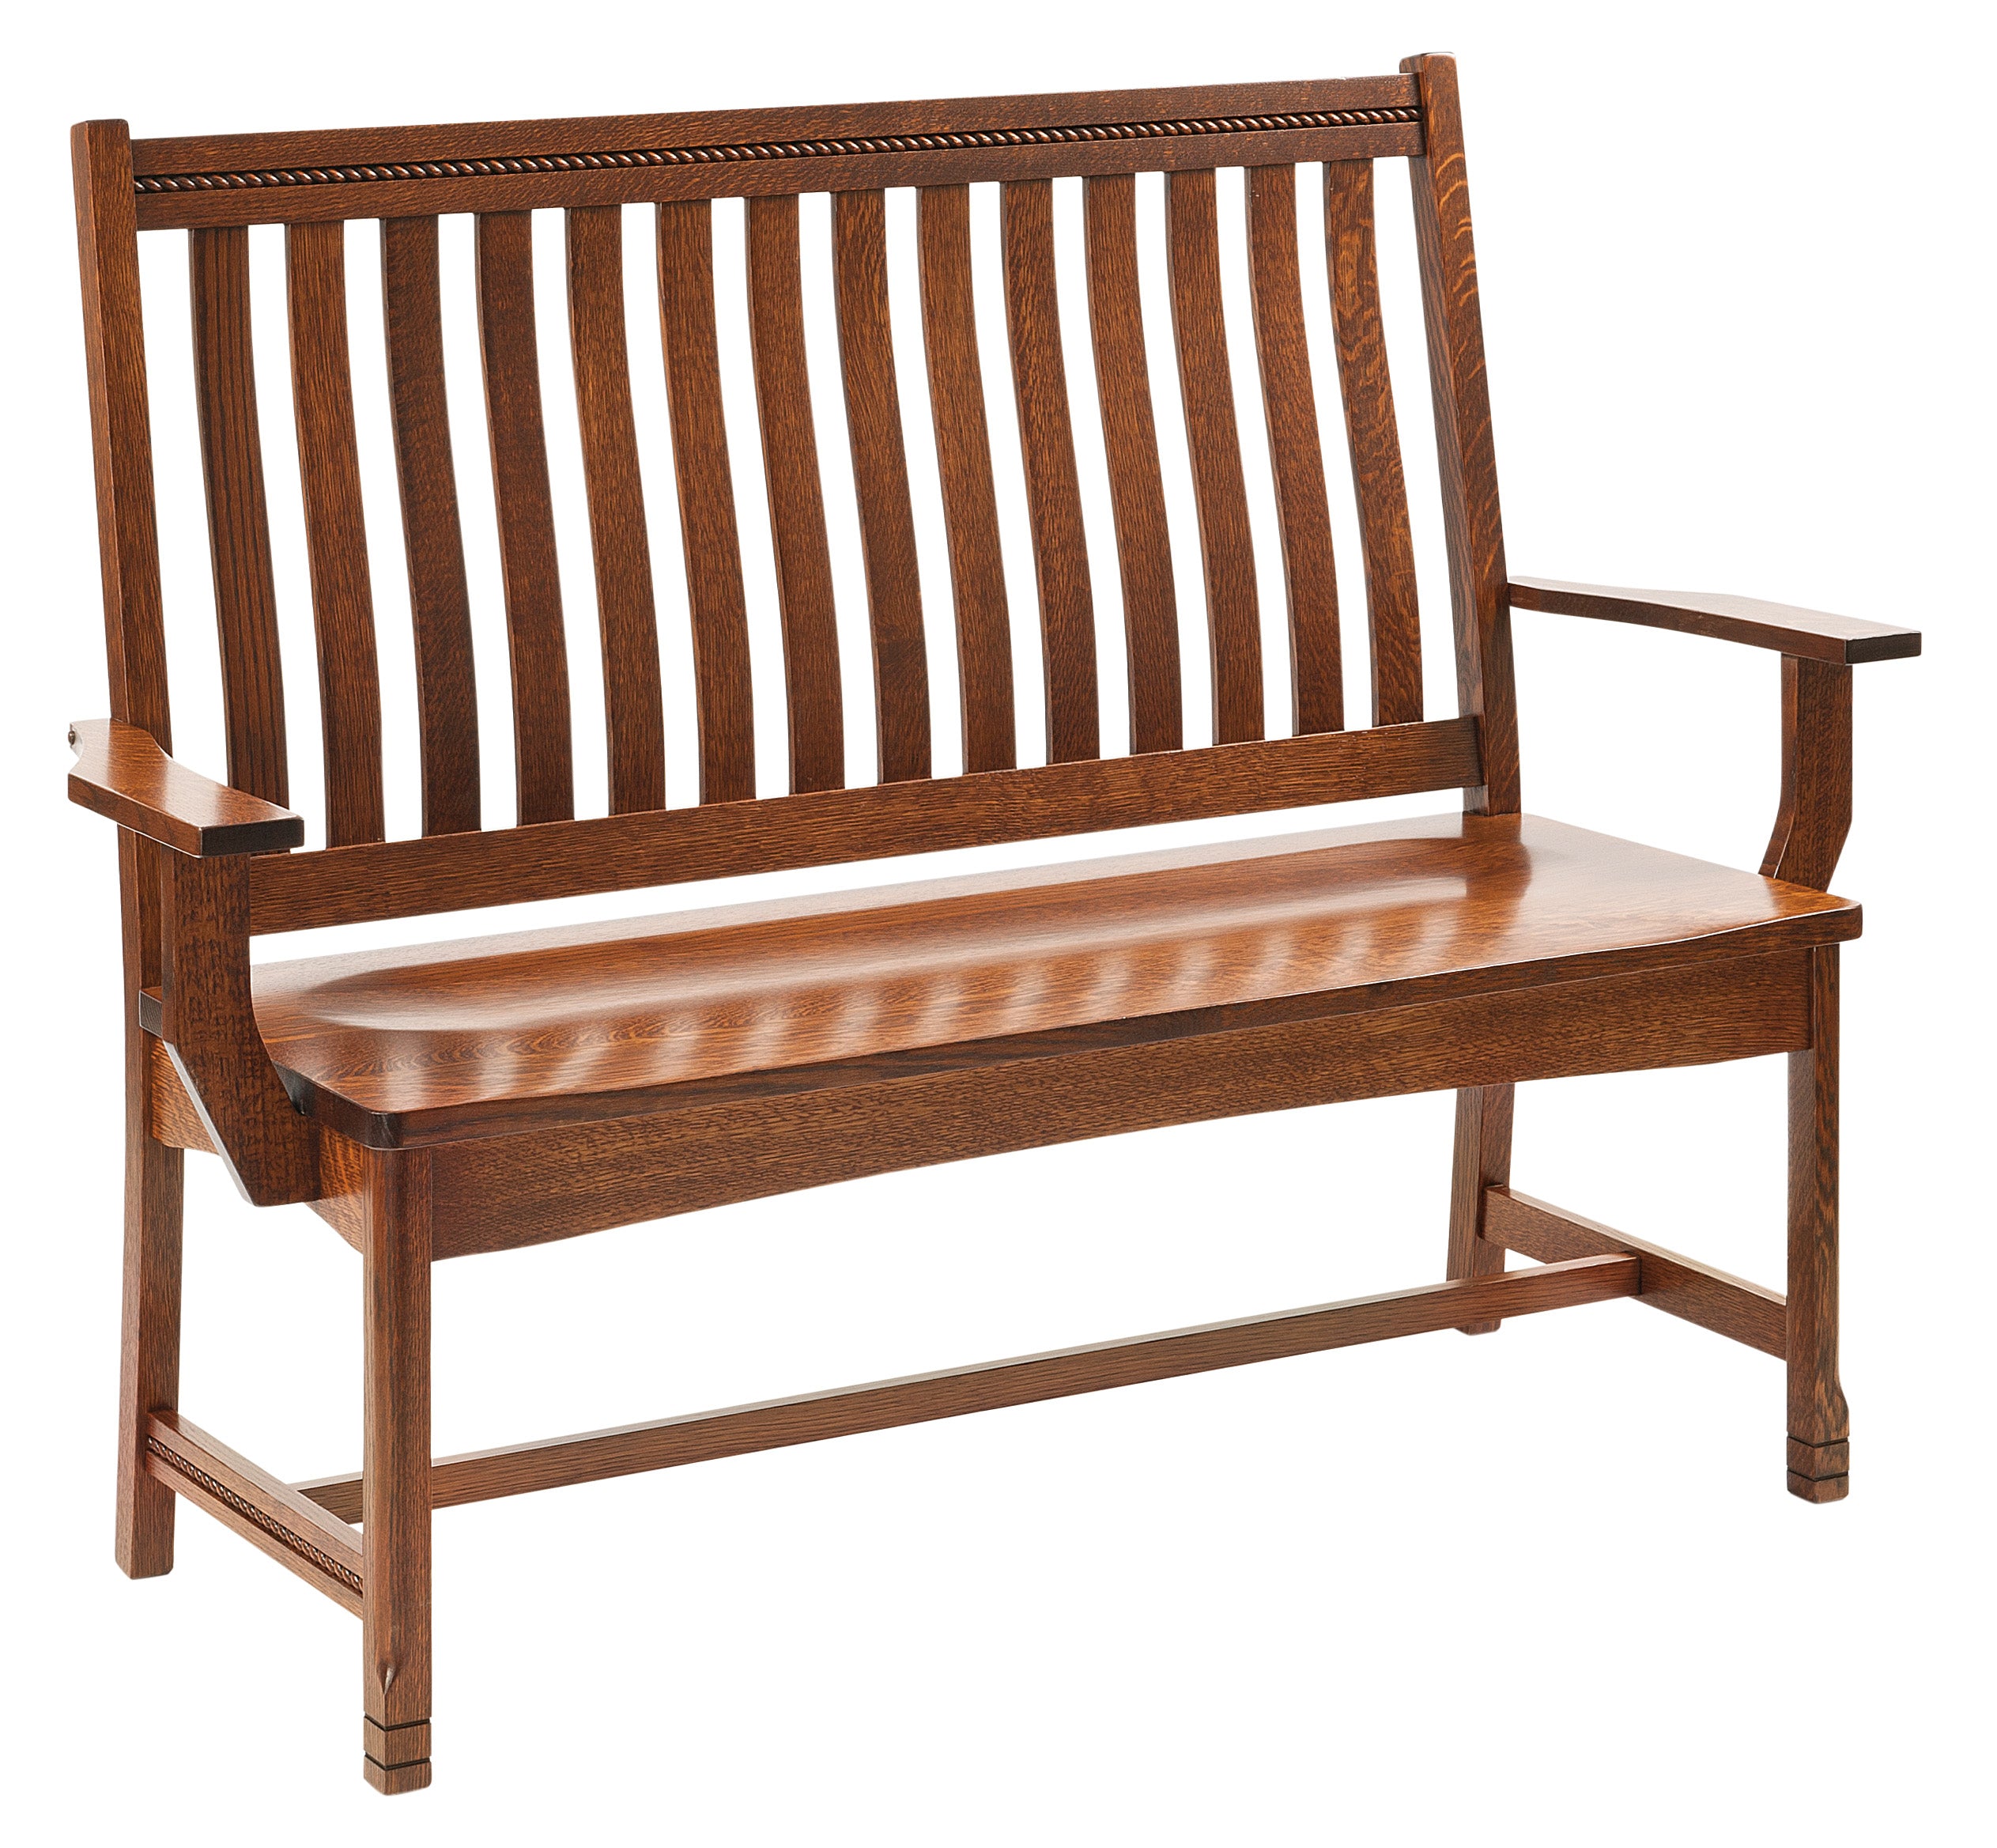 Amish West Lake Long Bench with Arm